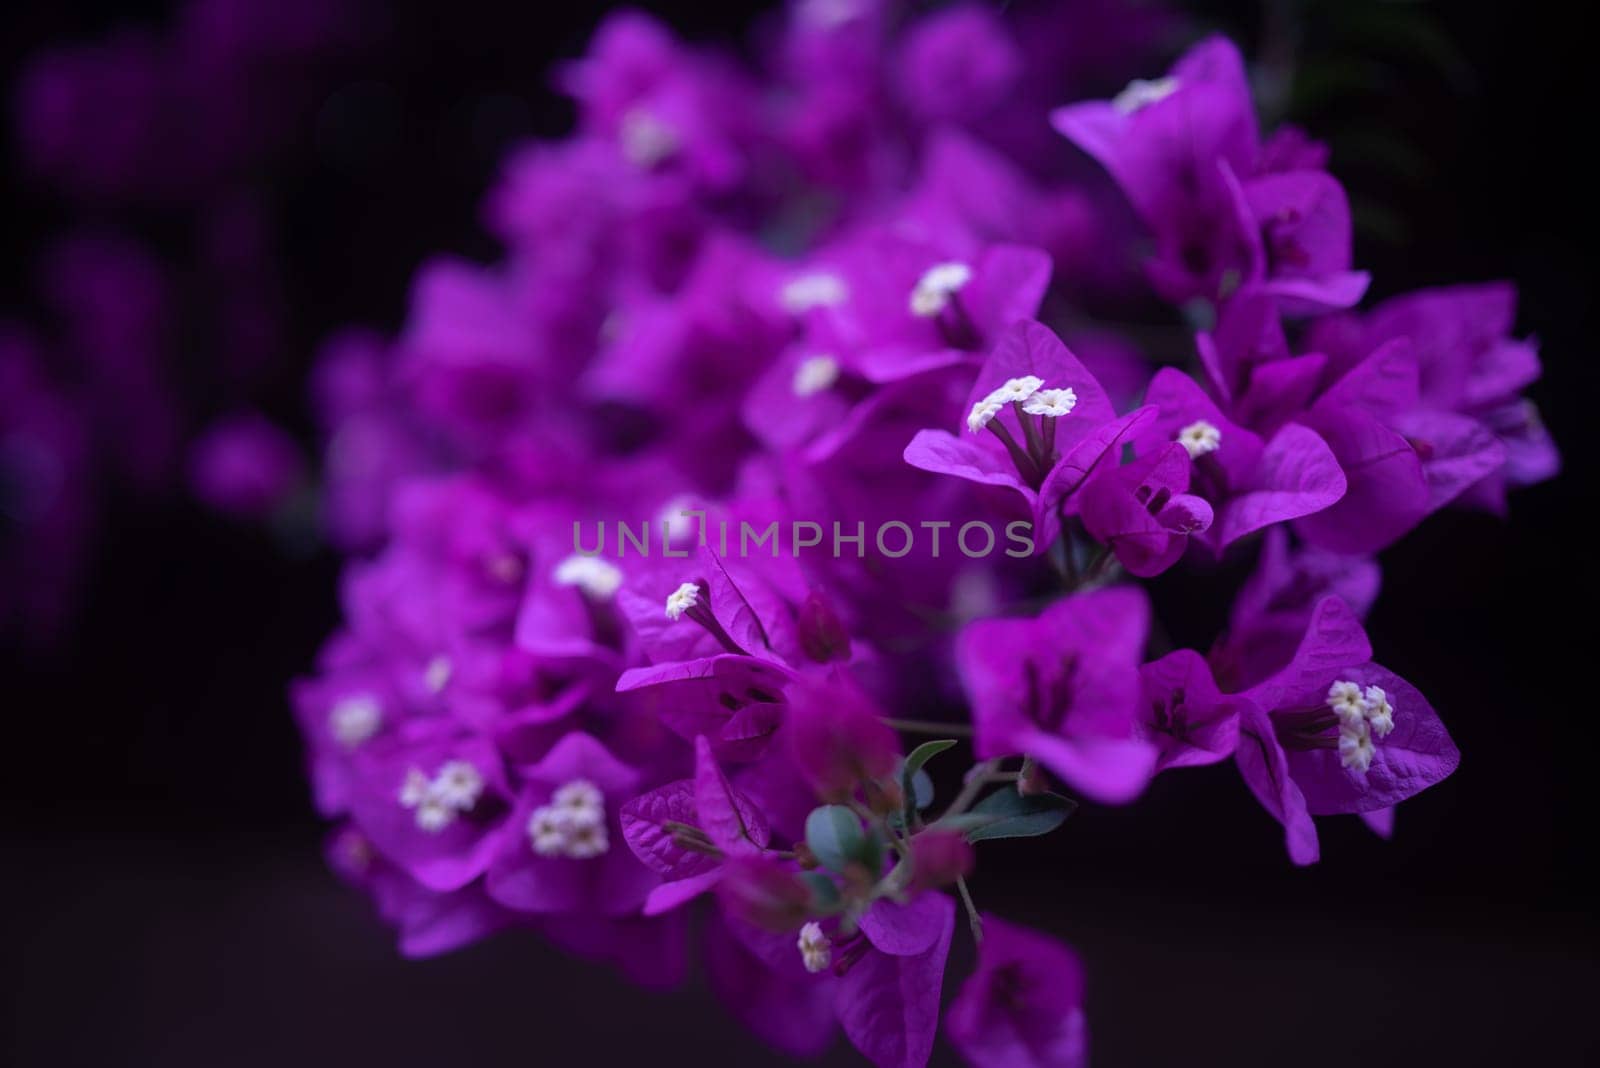 Bougainvillea flowers branch on black background, partly blurred photo. Bright white elements